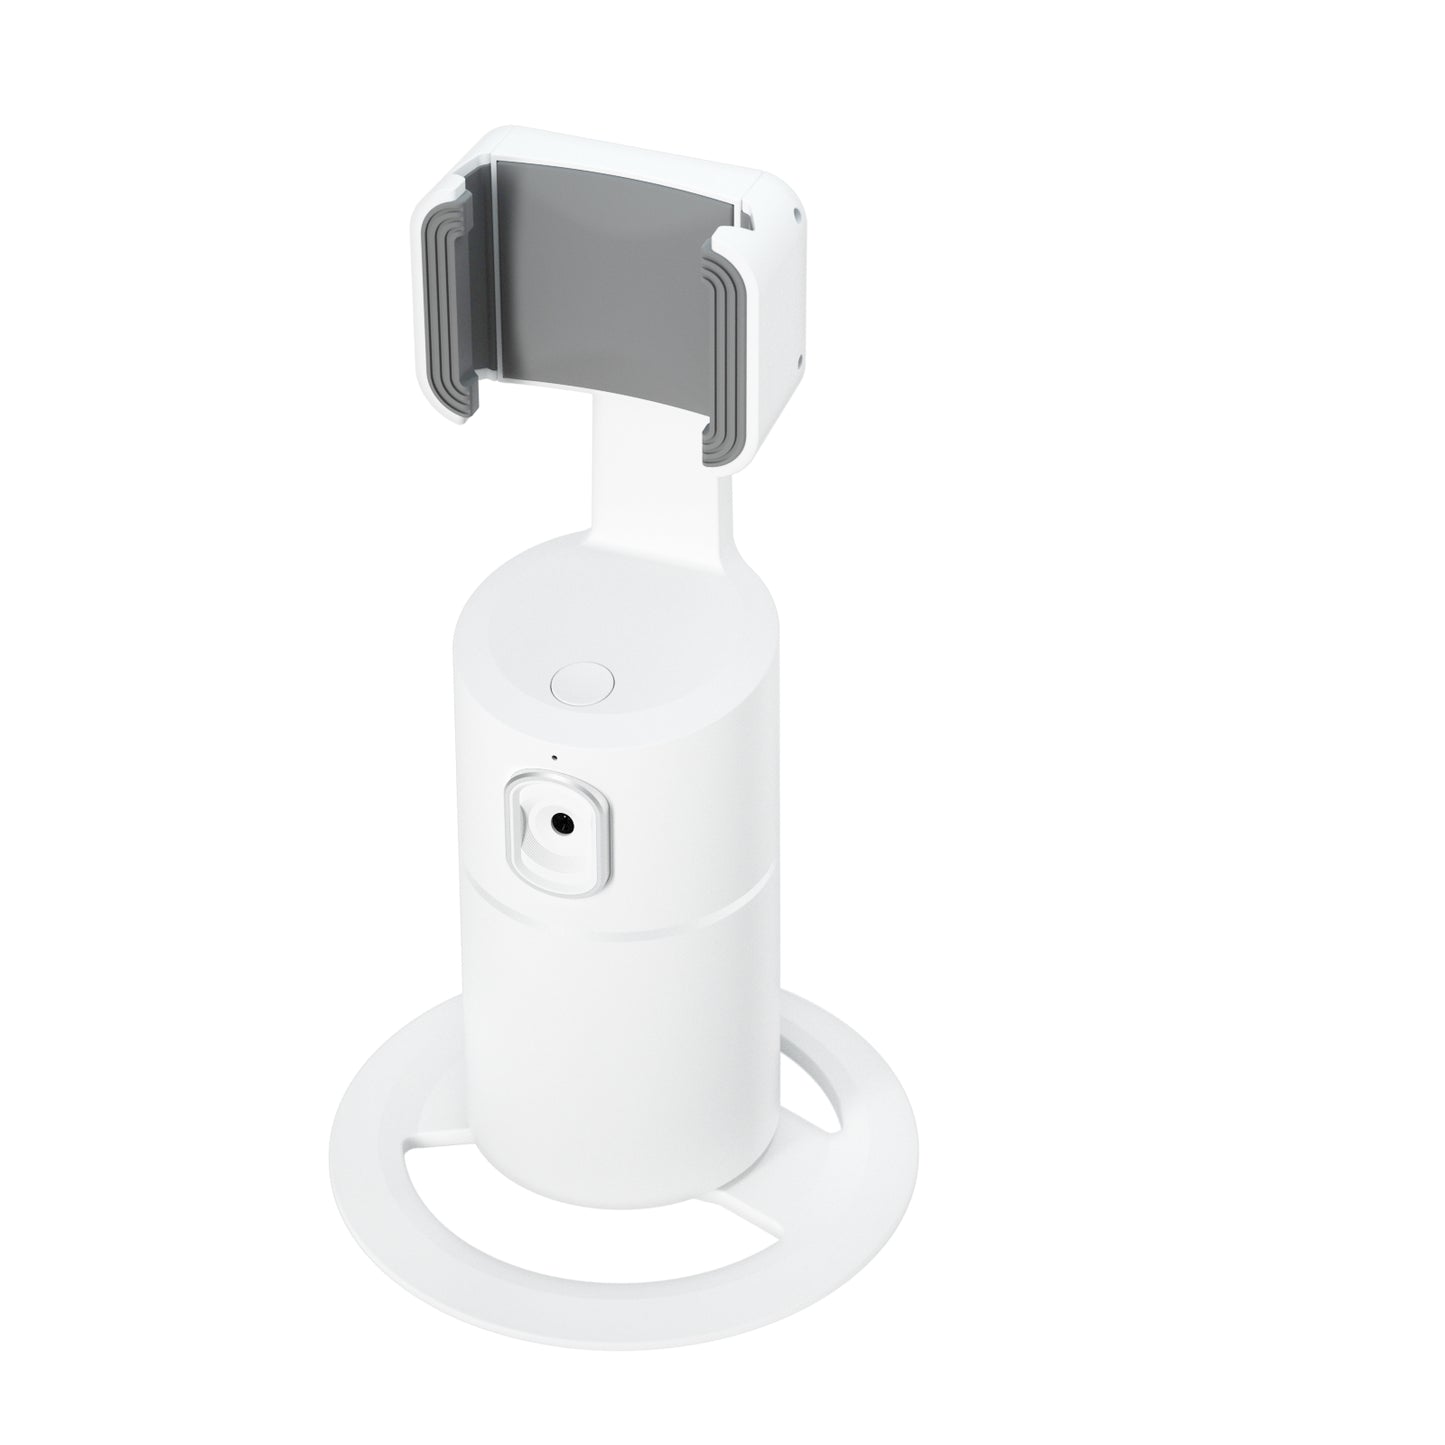 360-degree Smart Tracking Gimbal for Mobile Phone Stabilization